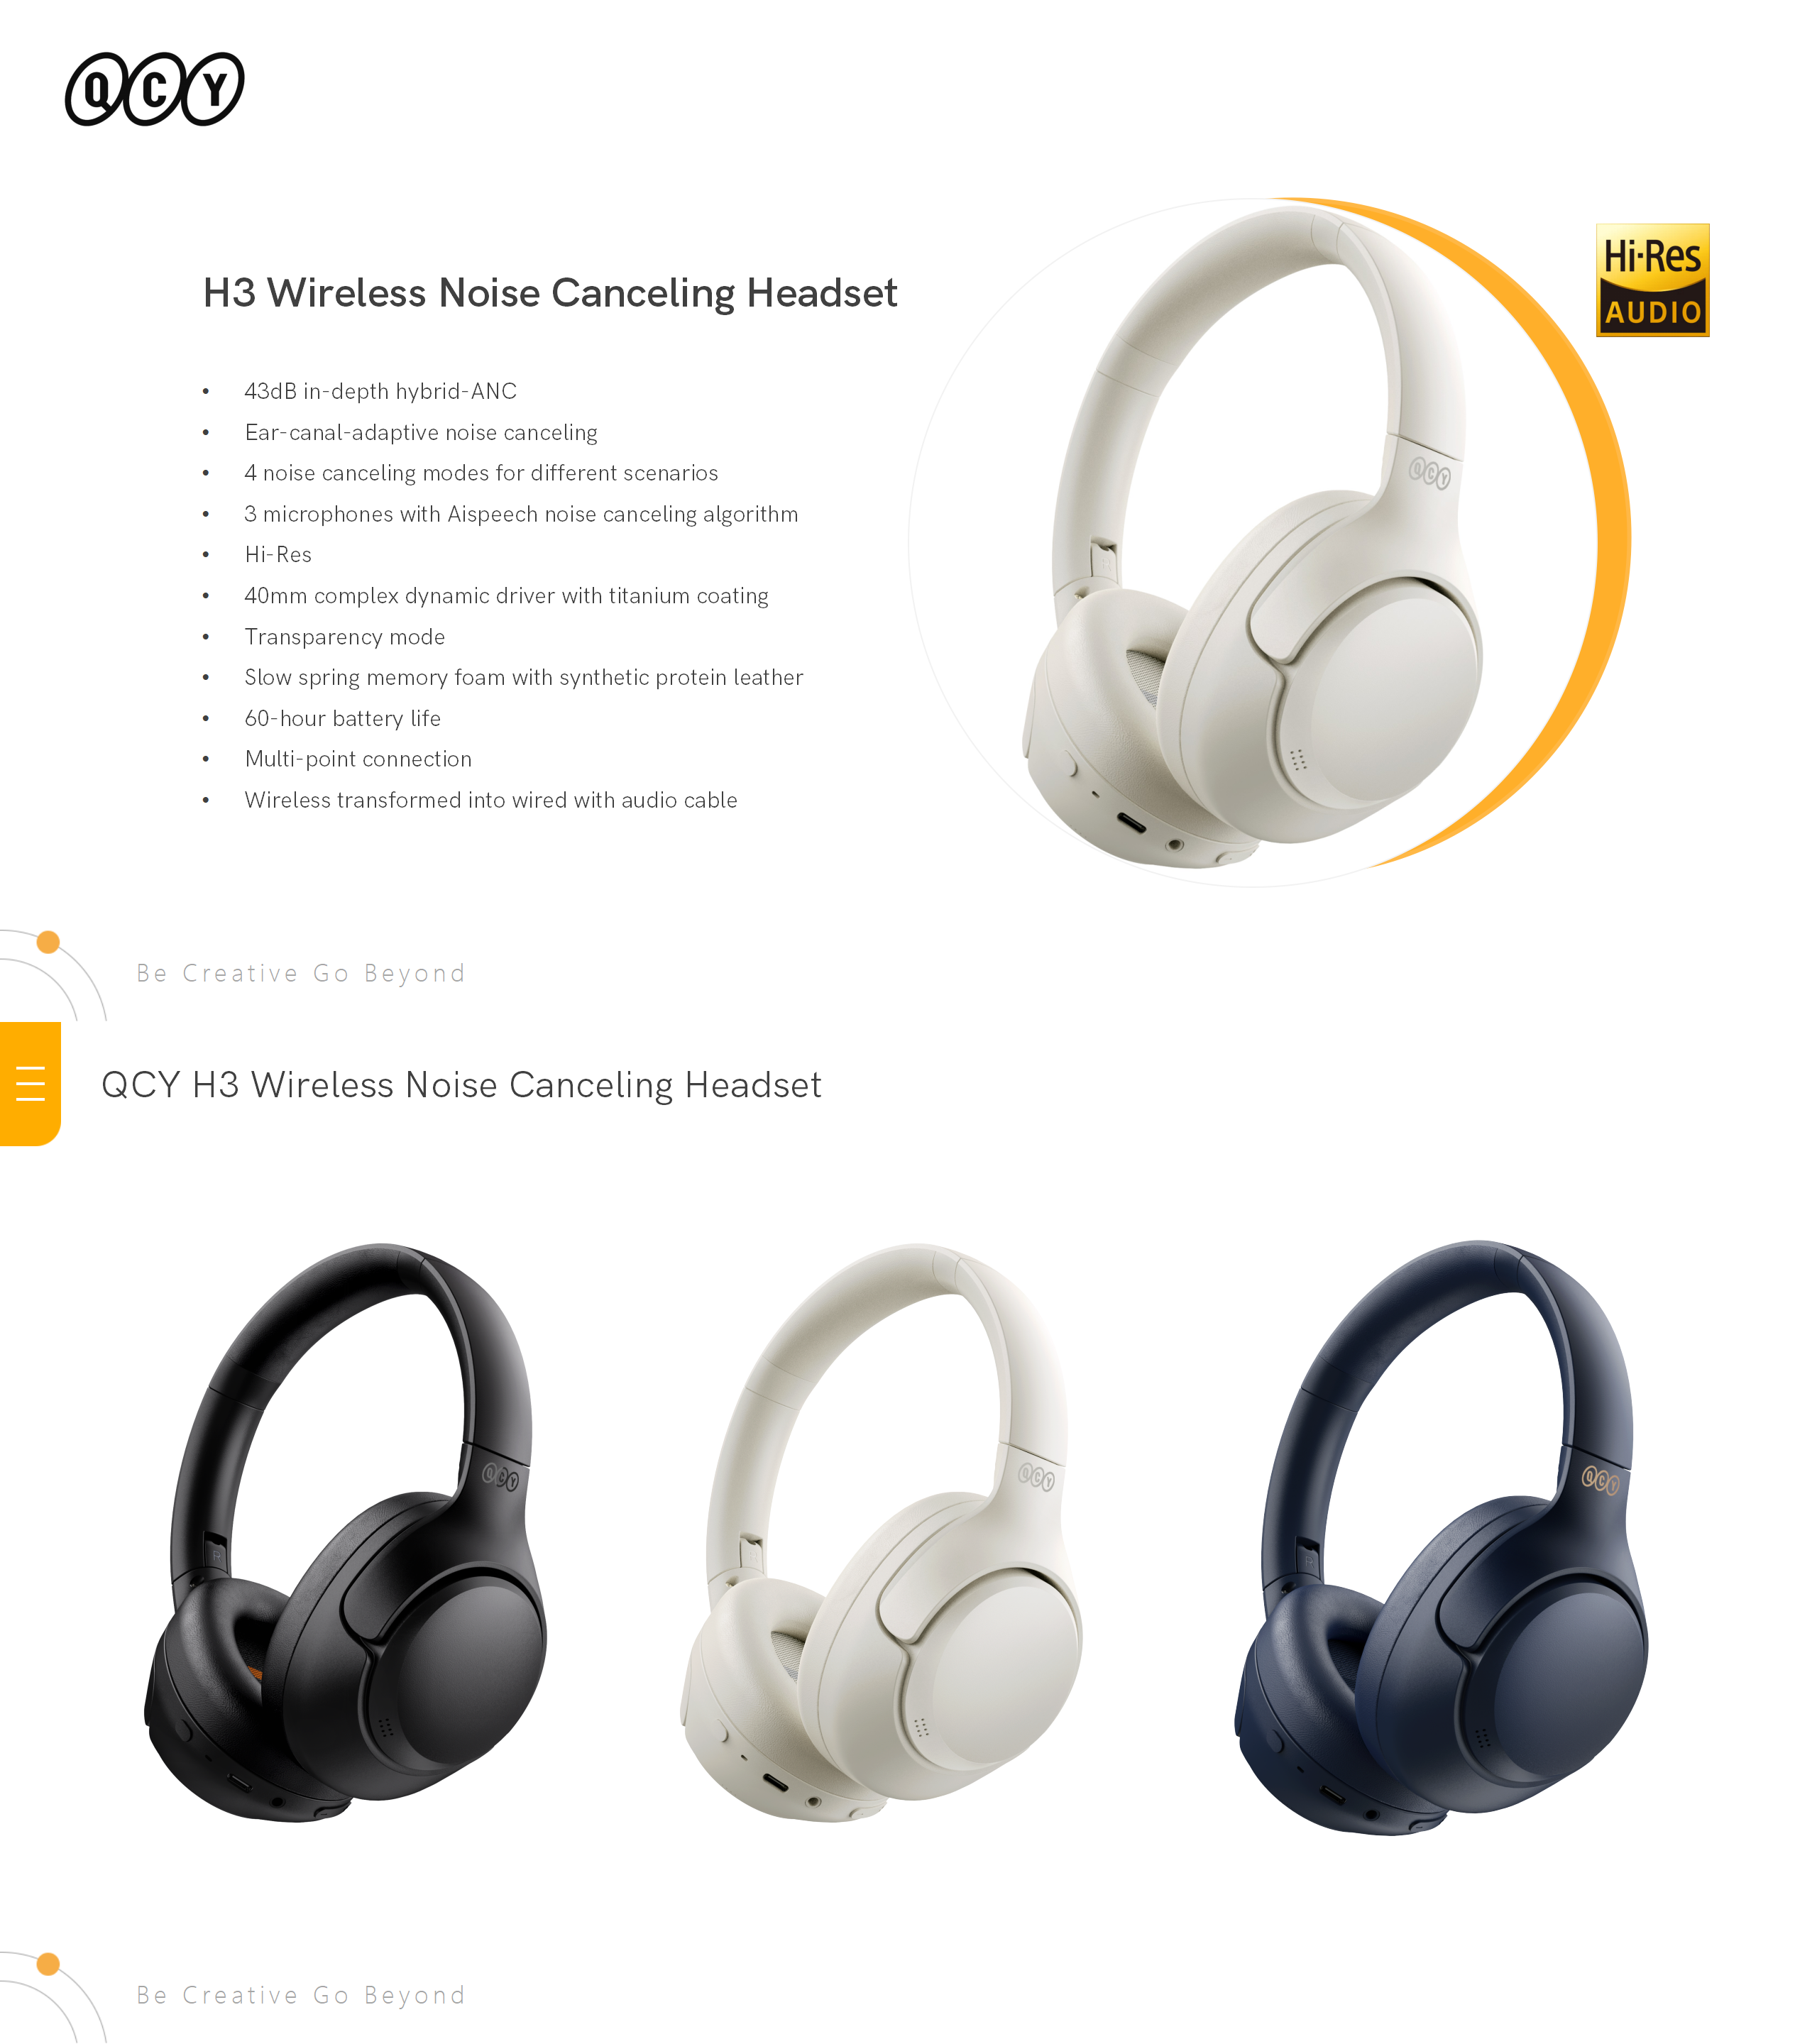 QCY H3 ANC Wireless Headphones 43dB Hybrid Active Noise Cancellation  Headset Bluetooth 5.4 Hi-Res Audio Earphones 60H Playtime